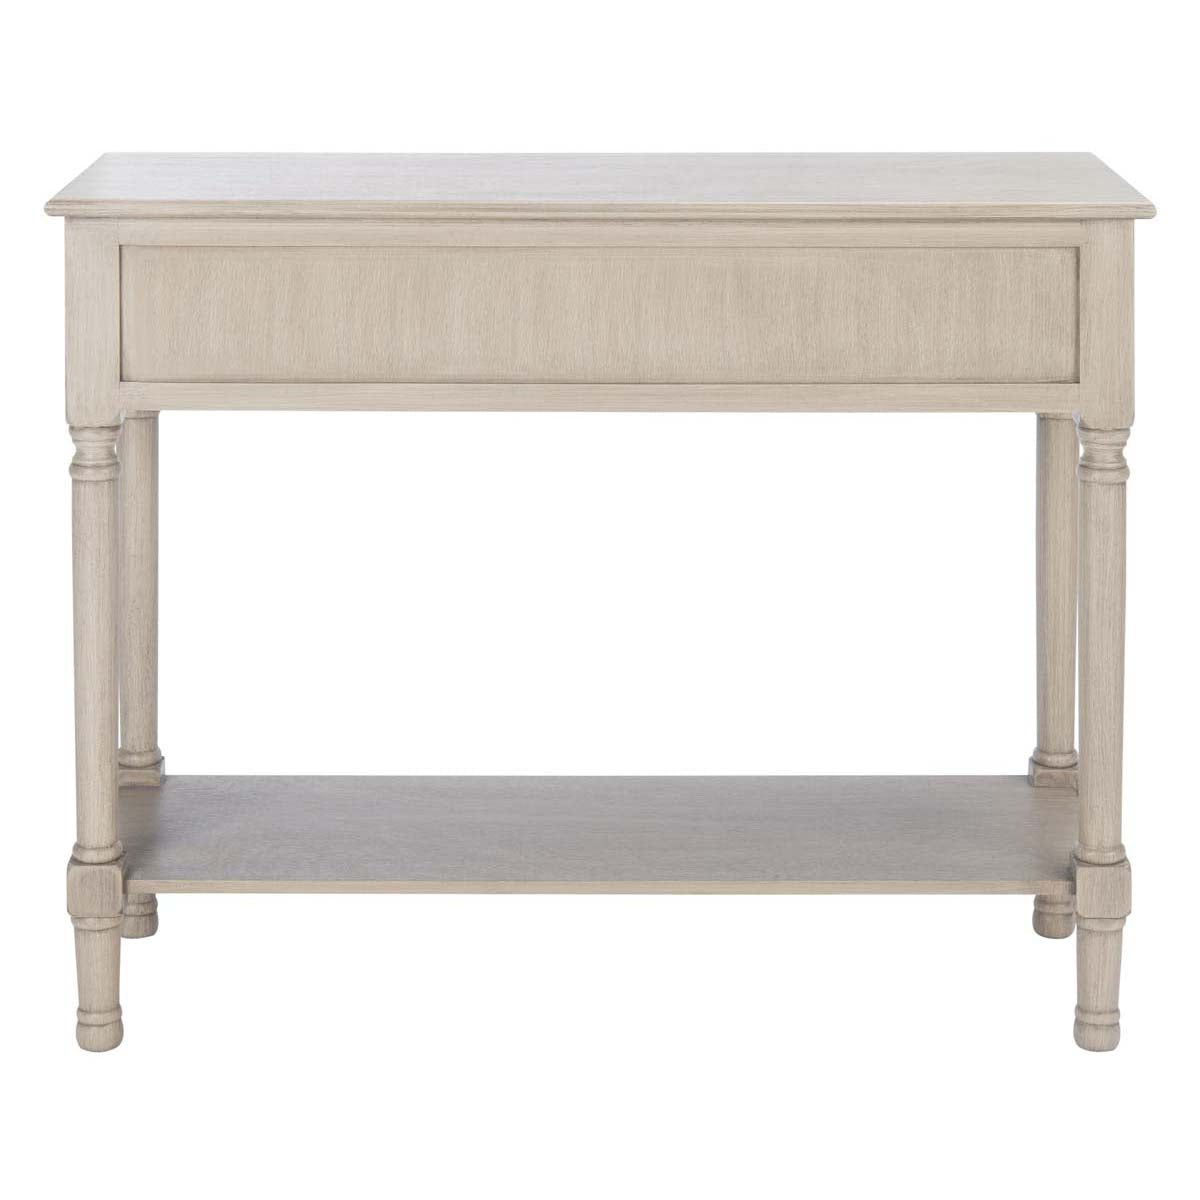 Safavieh Haines 2Drw Console Table, CNS5727 - Greige